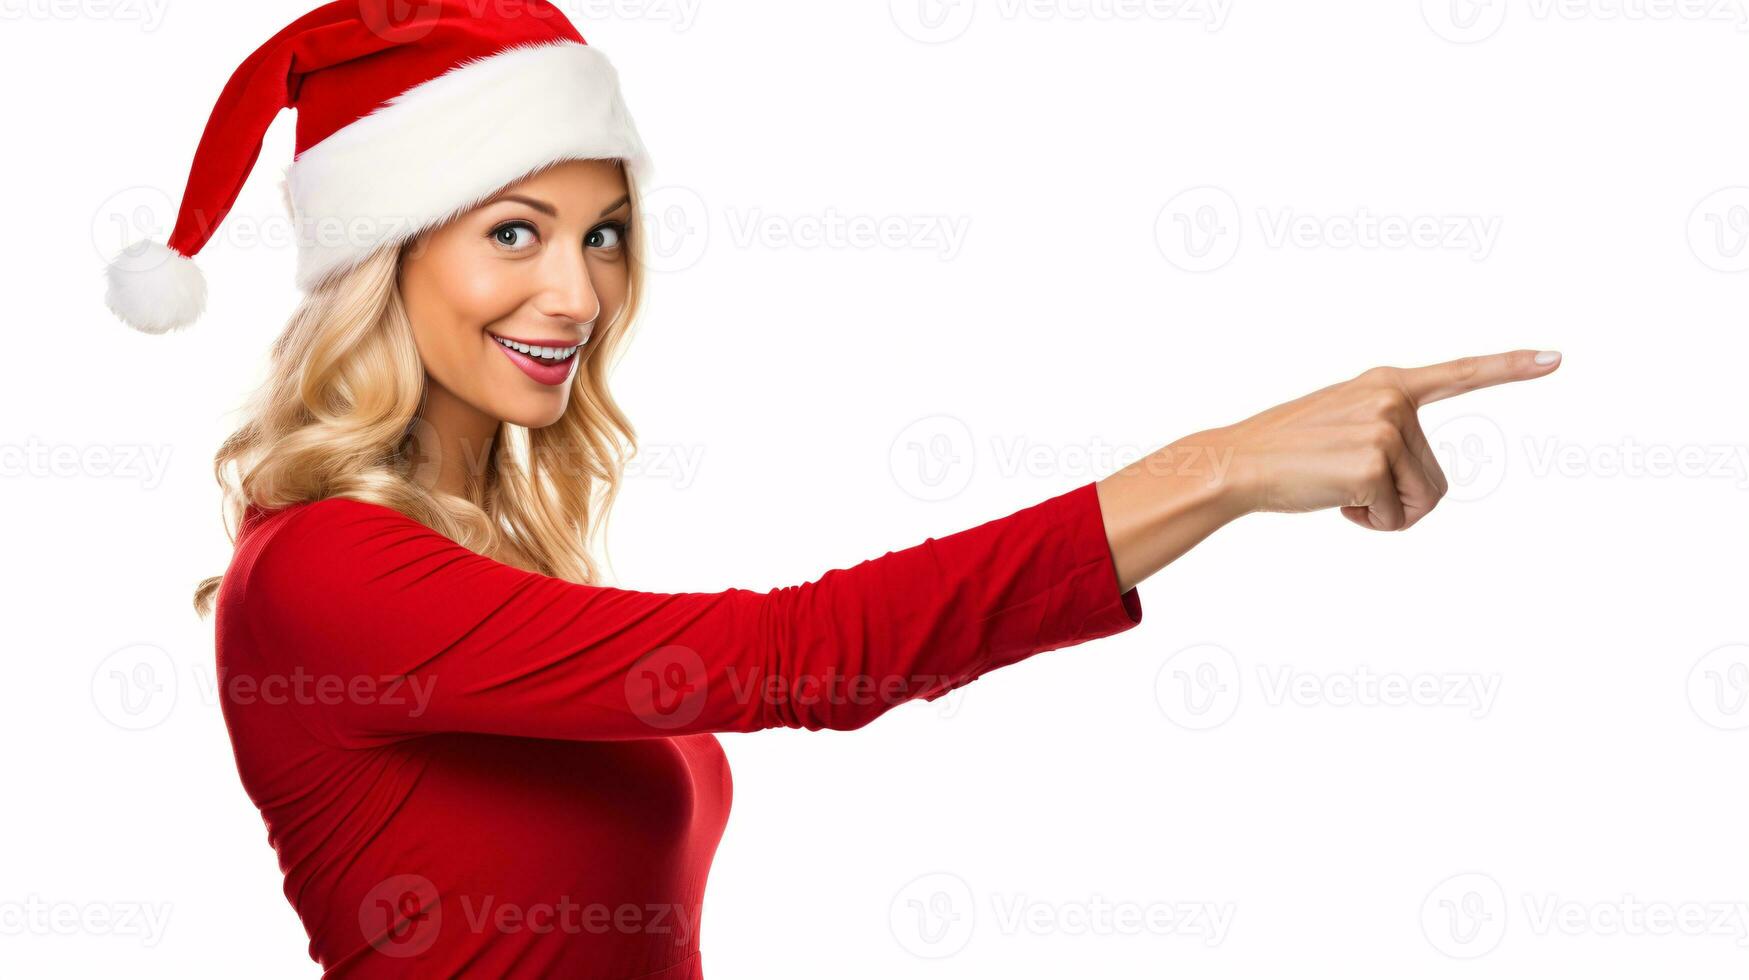 AI generated Dynamic Holiday offer Captivating Model in Festive Christmas Party Dress Points with Energetic Joy to a discount or special offer, Vibrant Colors on a Pristine White Background photo